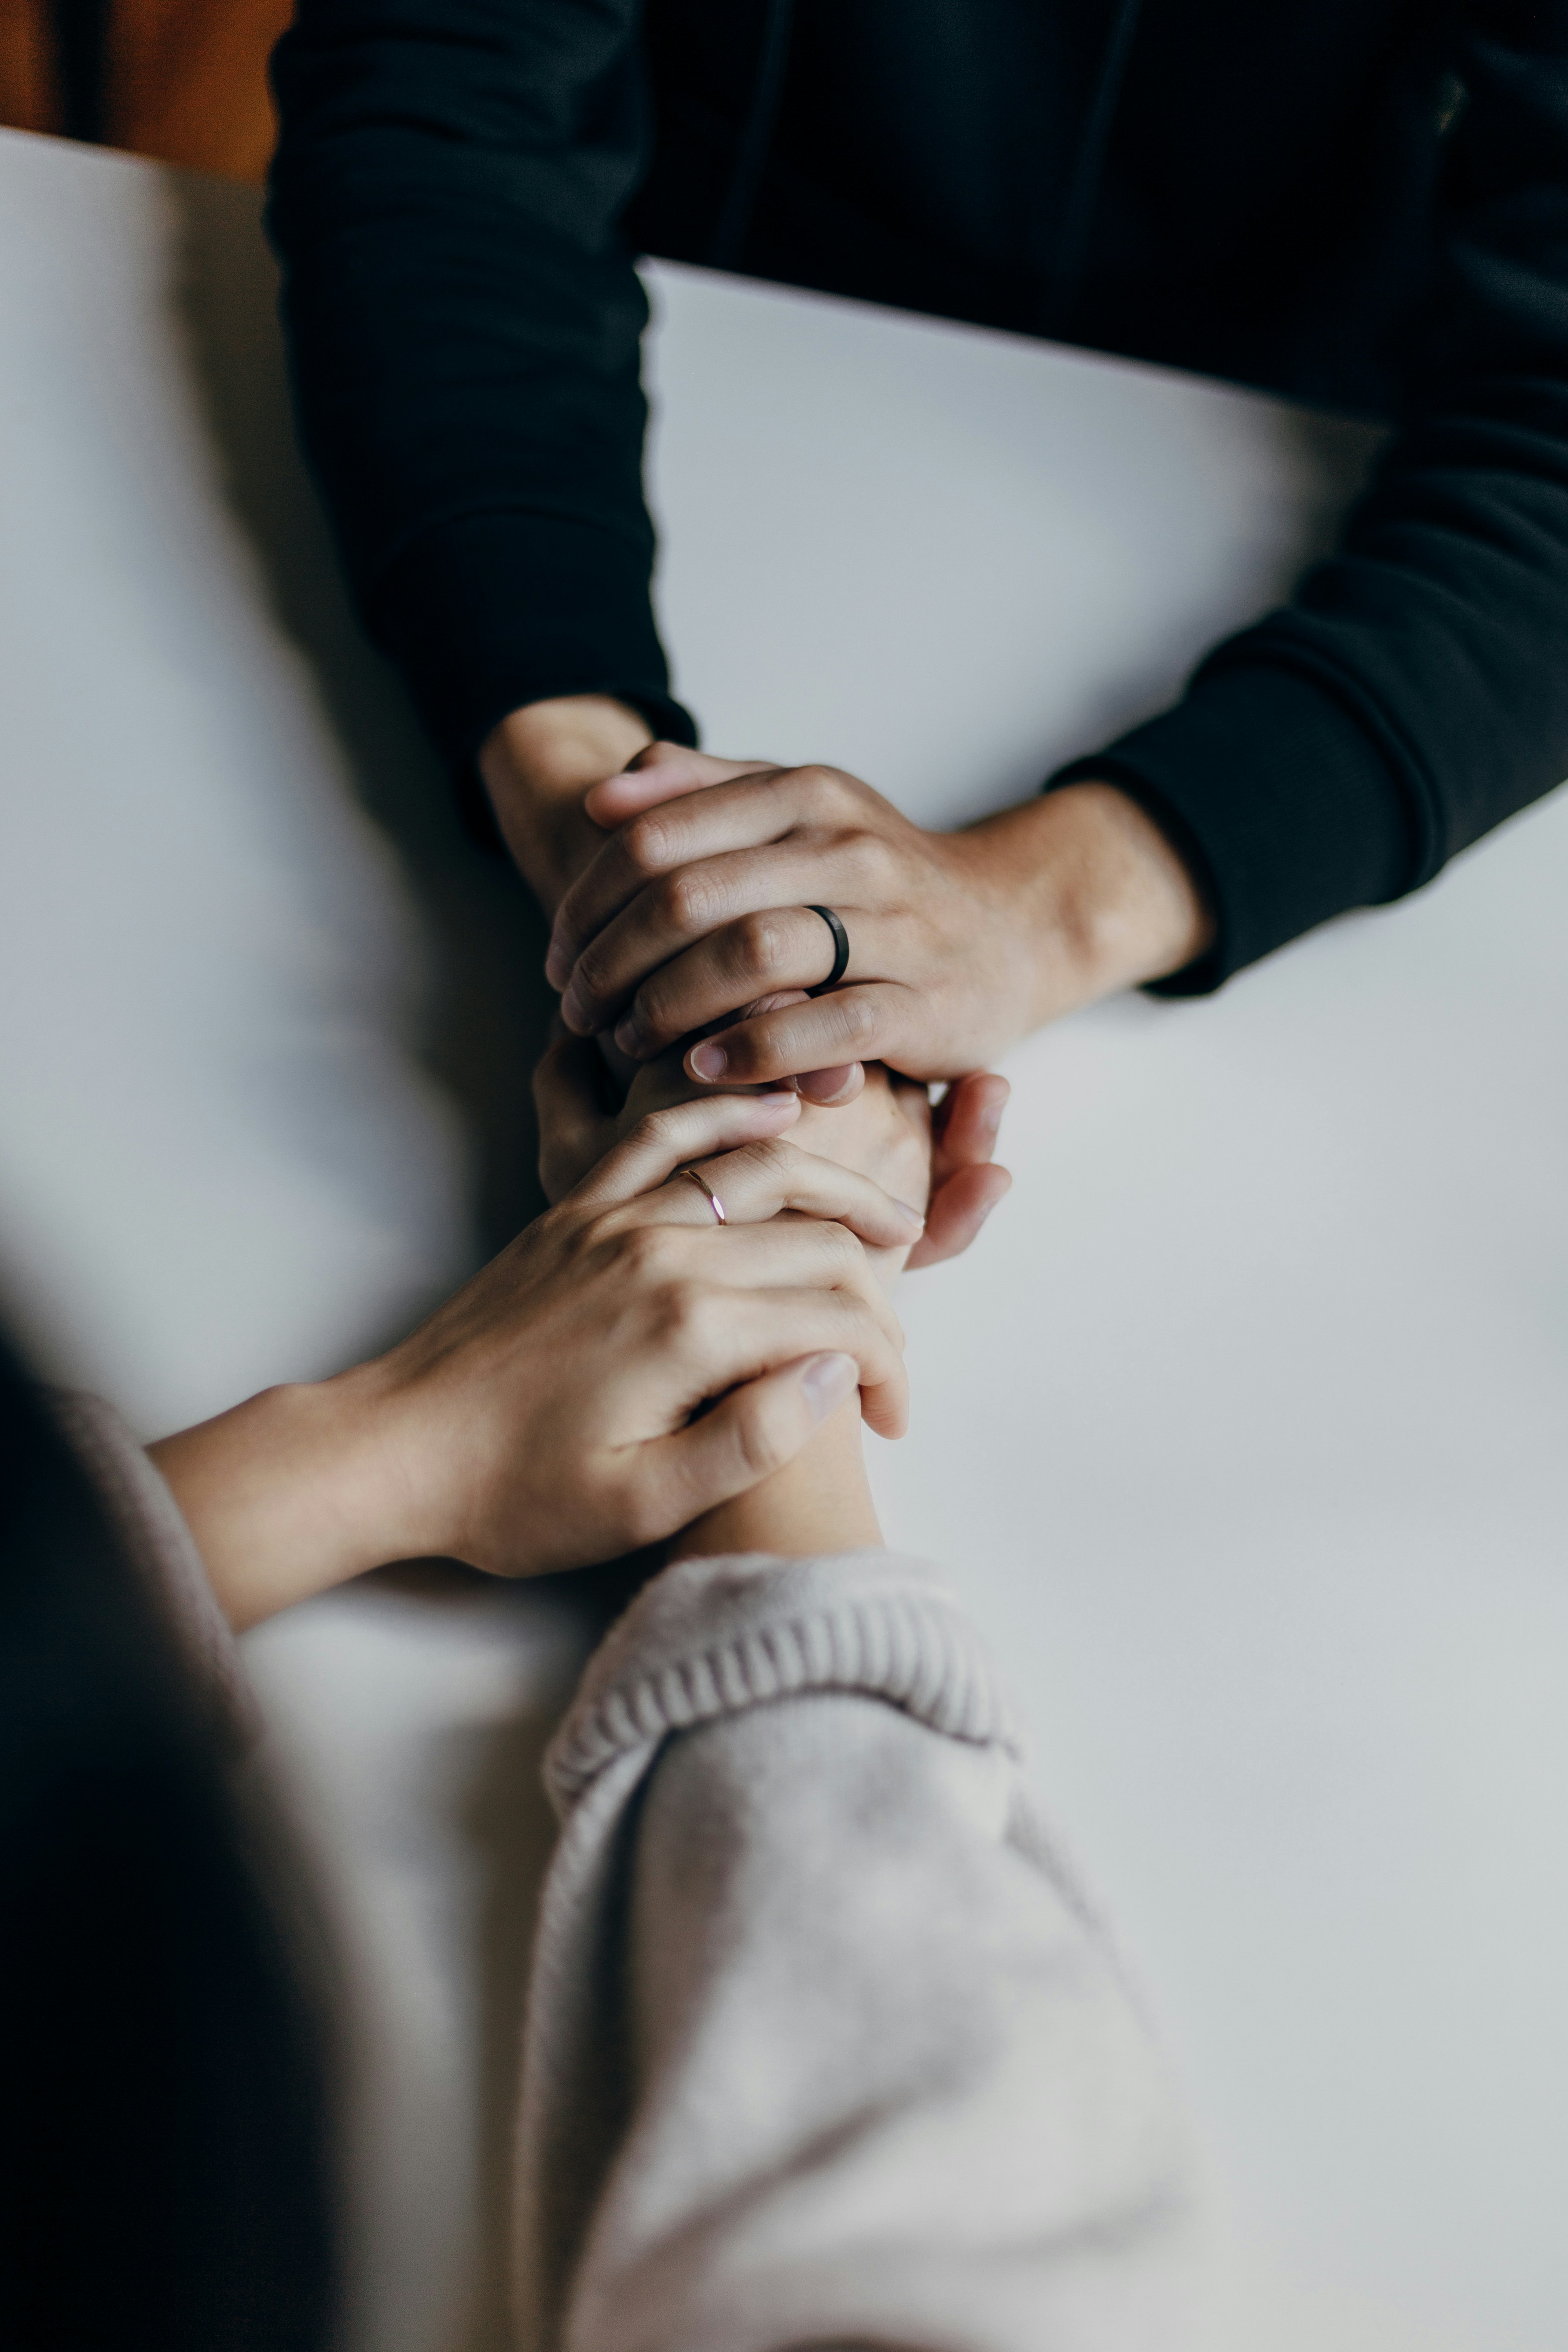 Couple holding hands | Source: Pexels